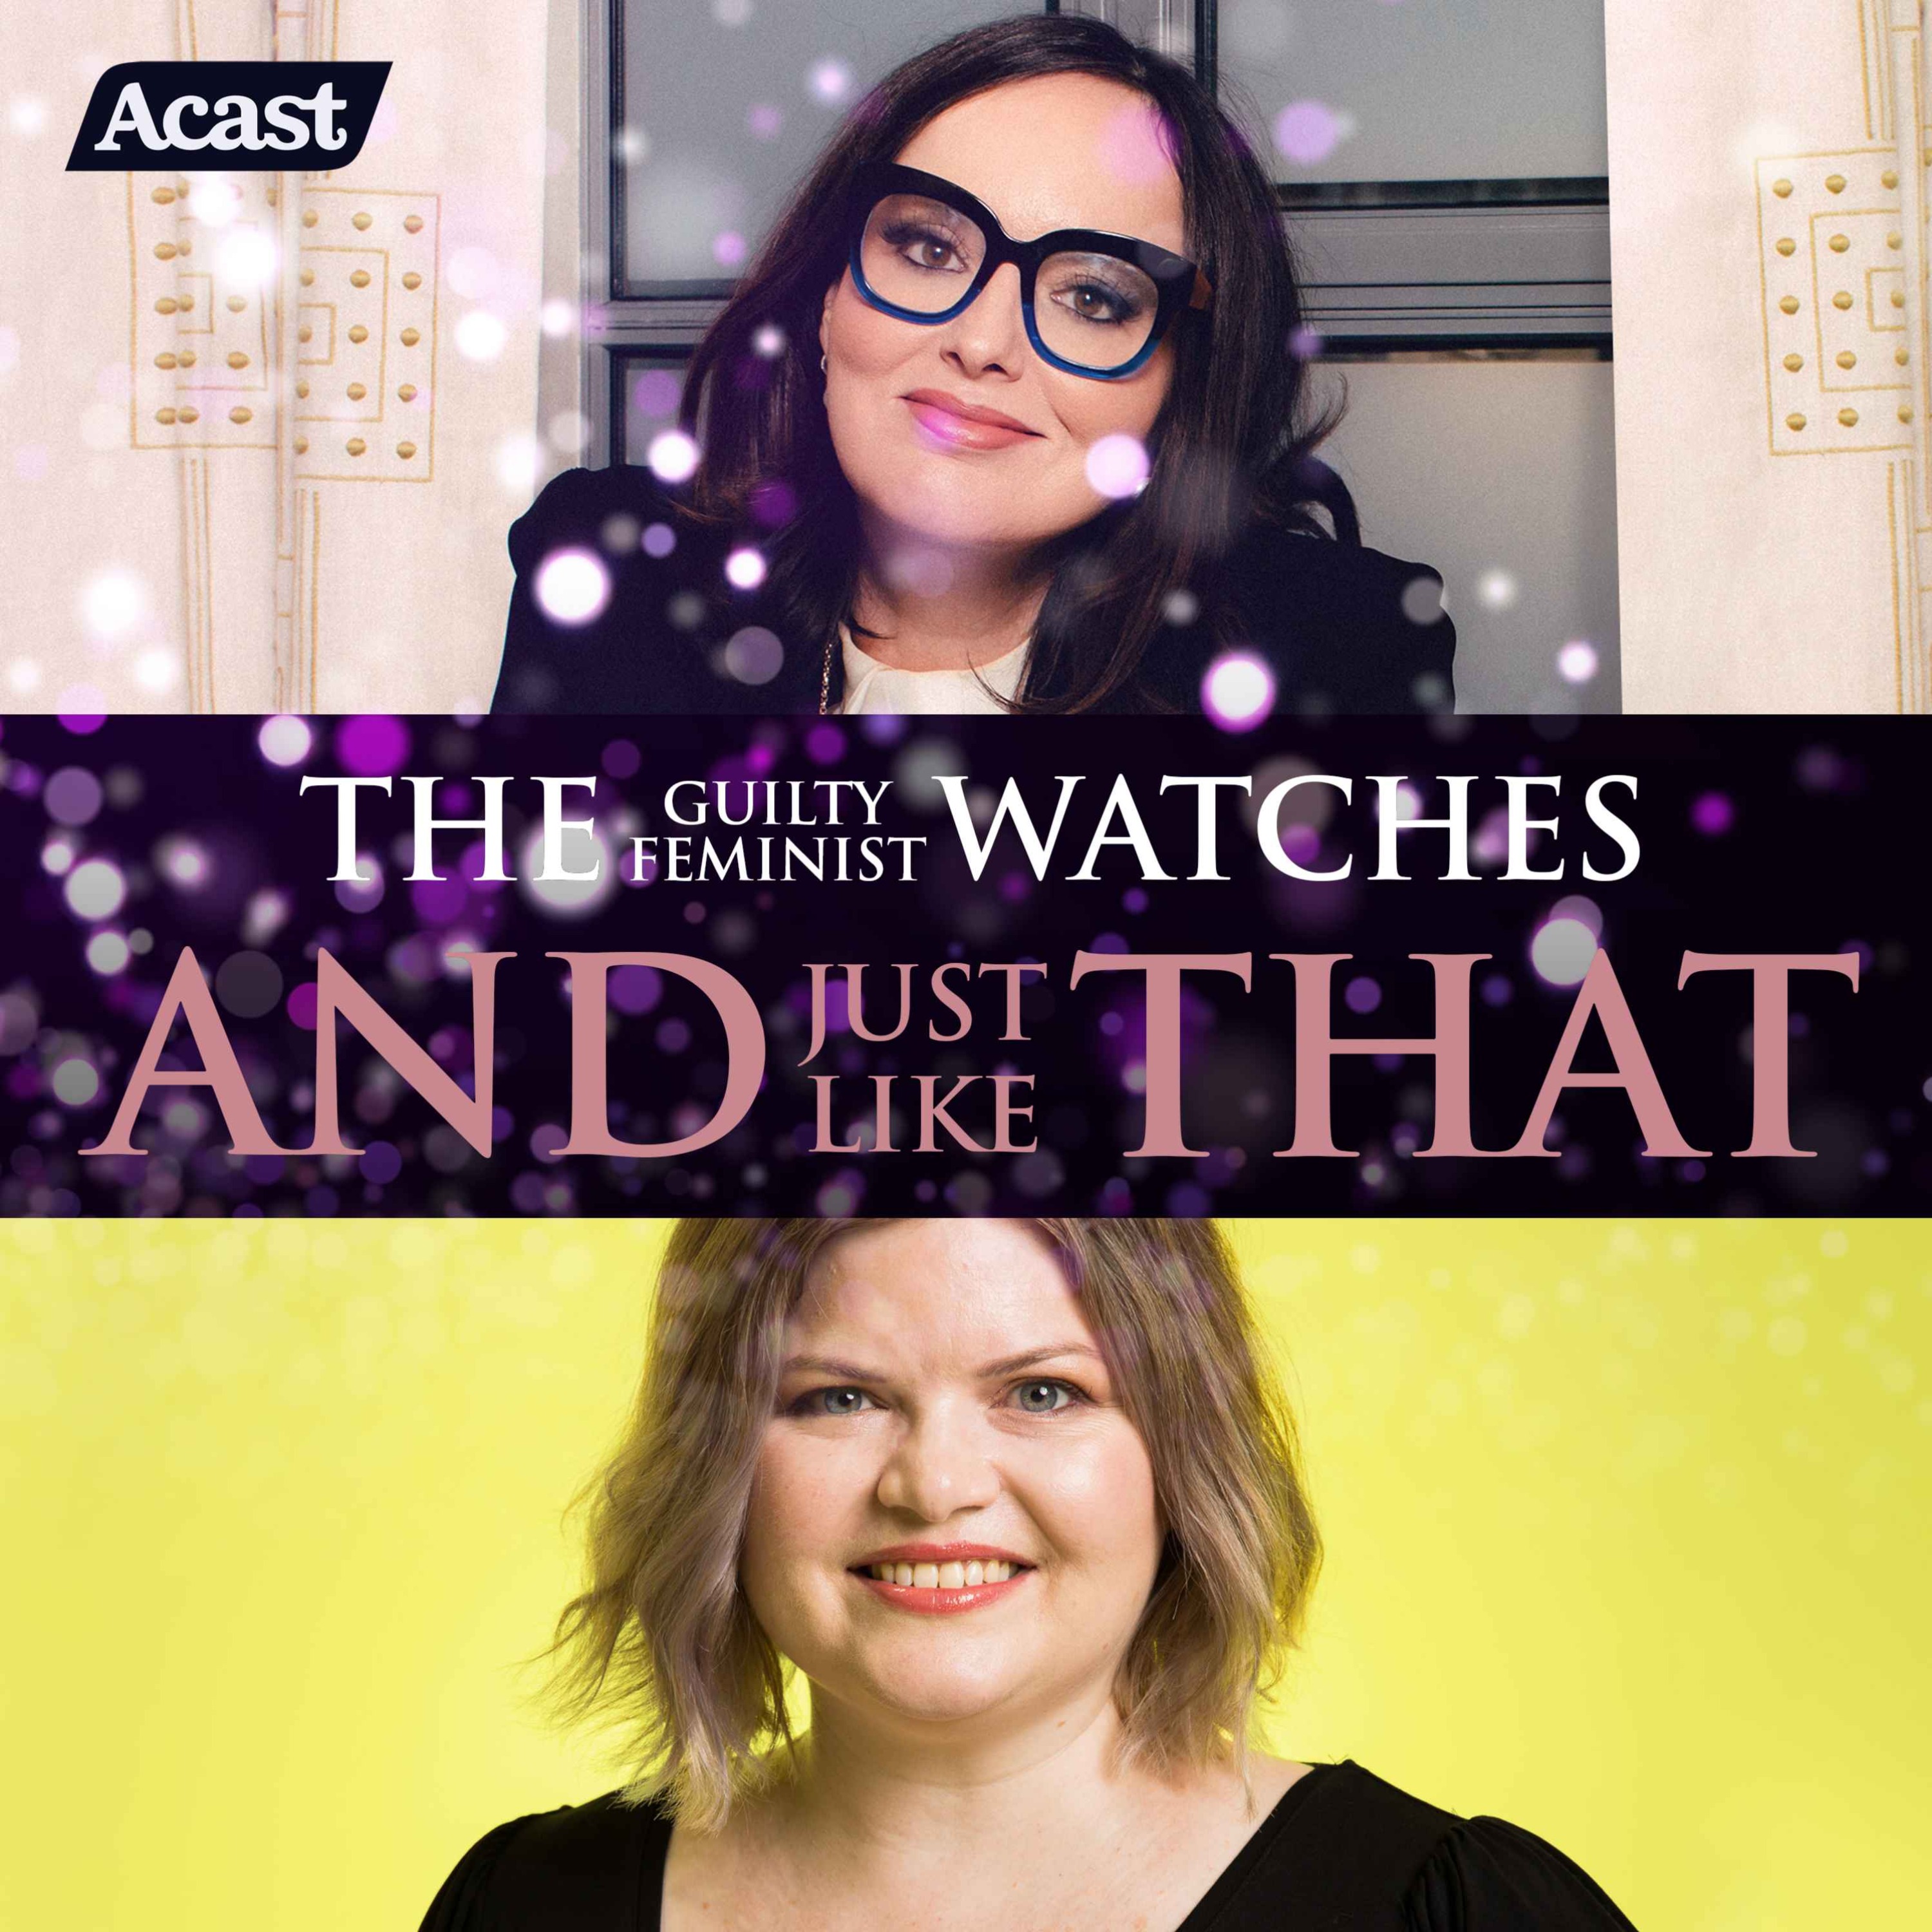 The Guilty Feminist watches And Just Like That - Episode 6 with Natalie Bochenski